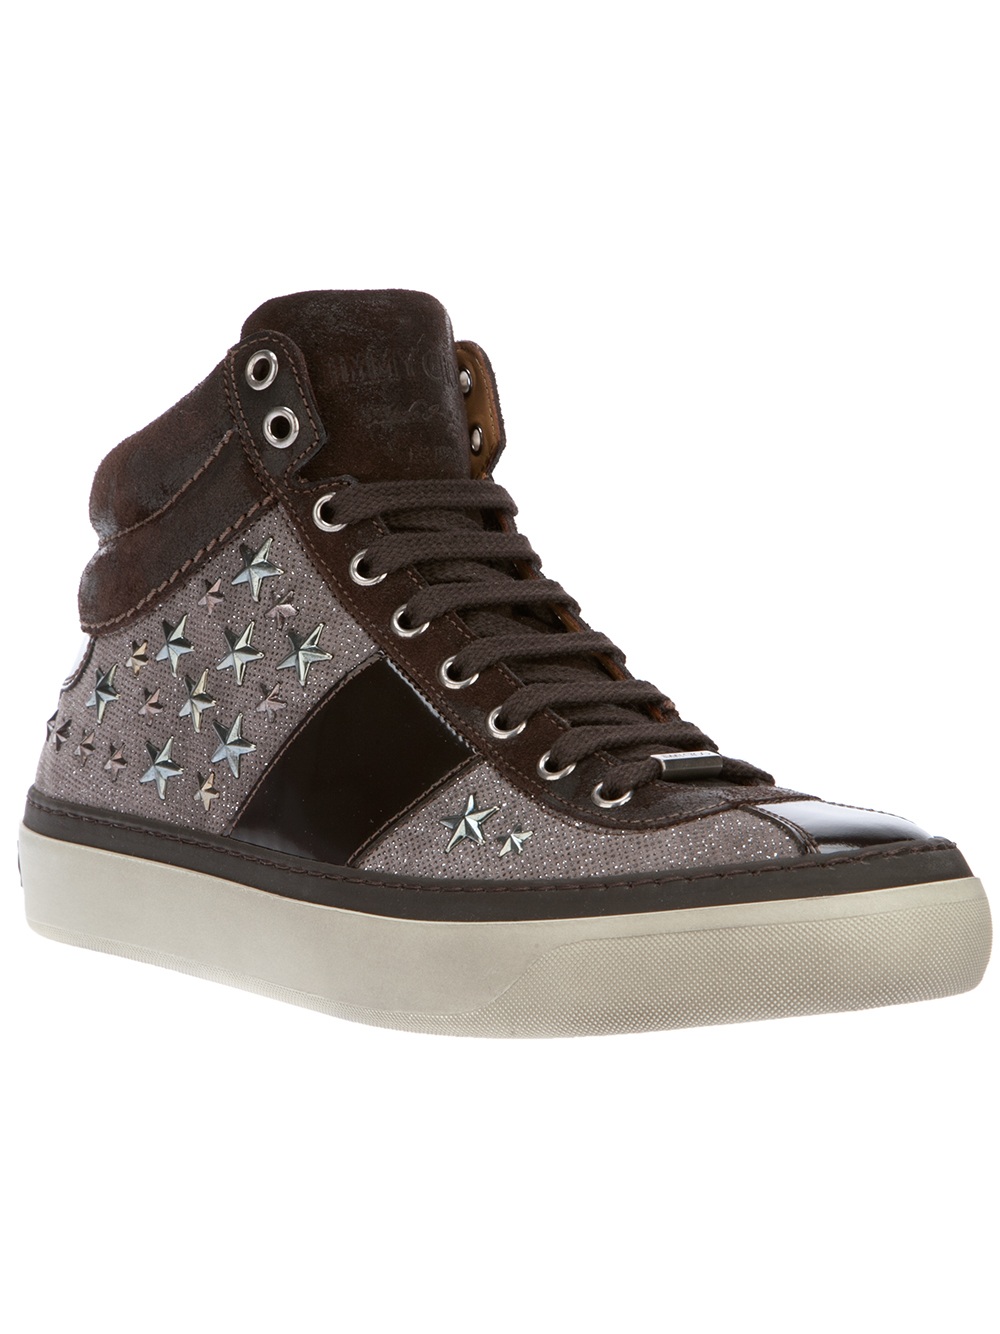 Jimmy Choo Studded Trainer in Gray (brown) | Lyst